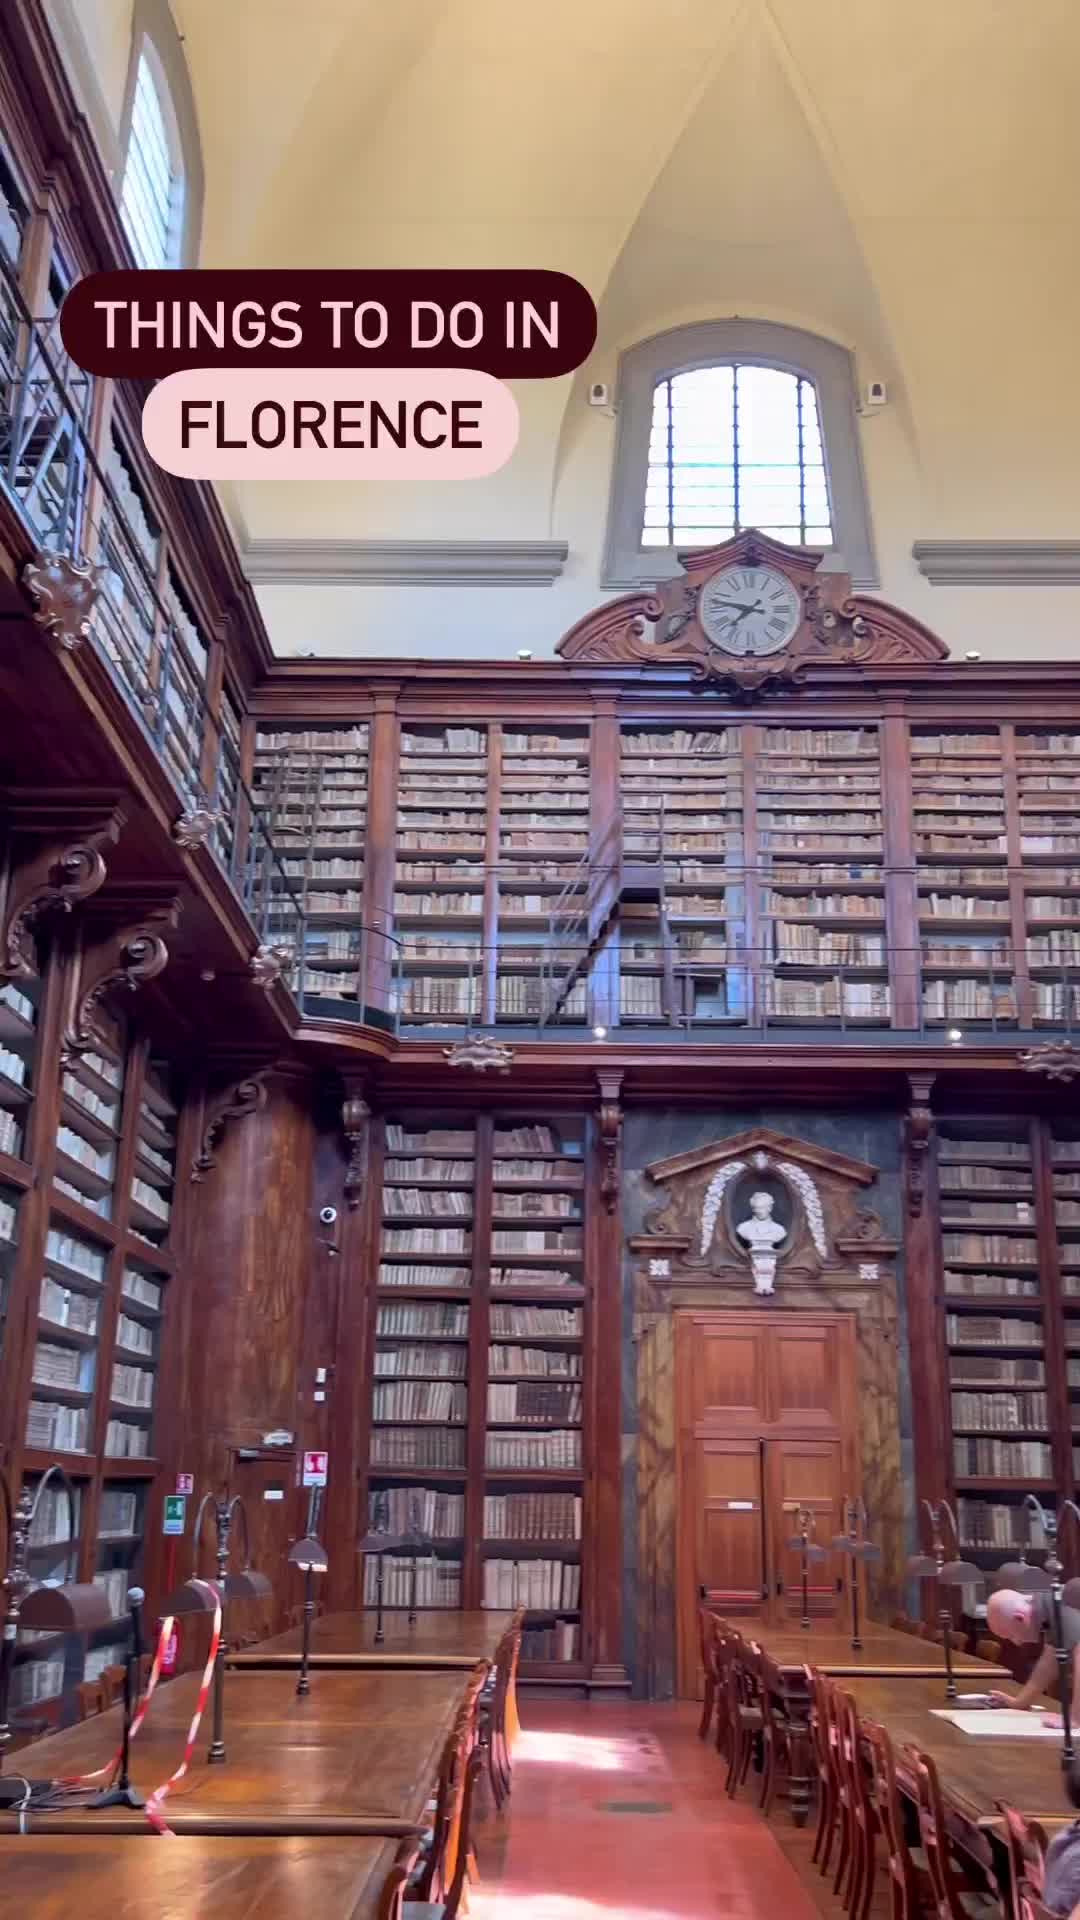 Things to Do in Florence: Visit Biblioteca Marucelliana